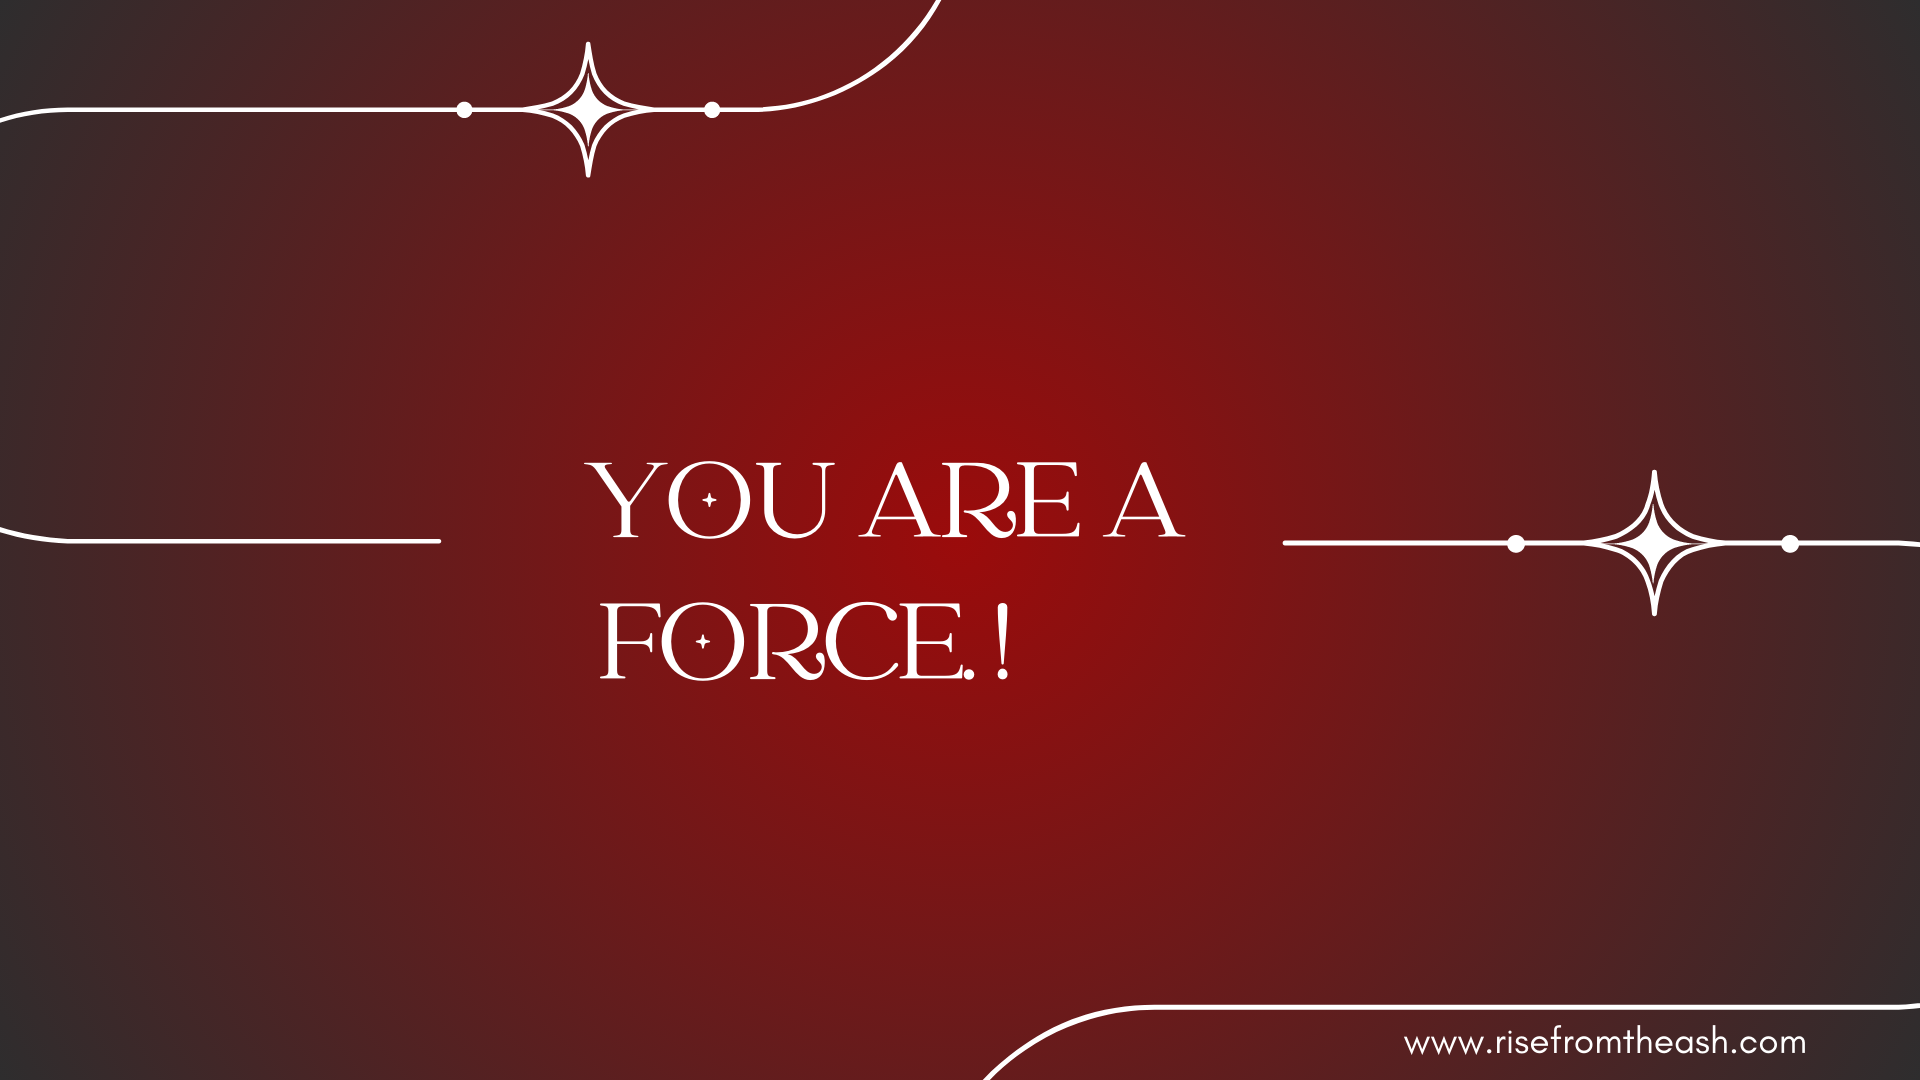 You are a Force!